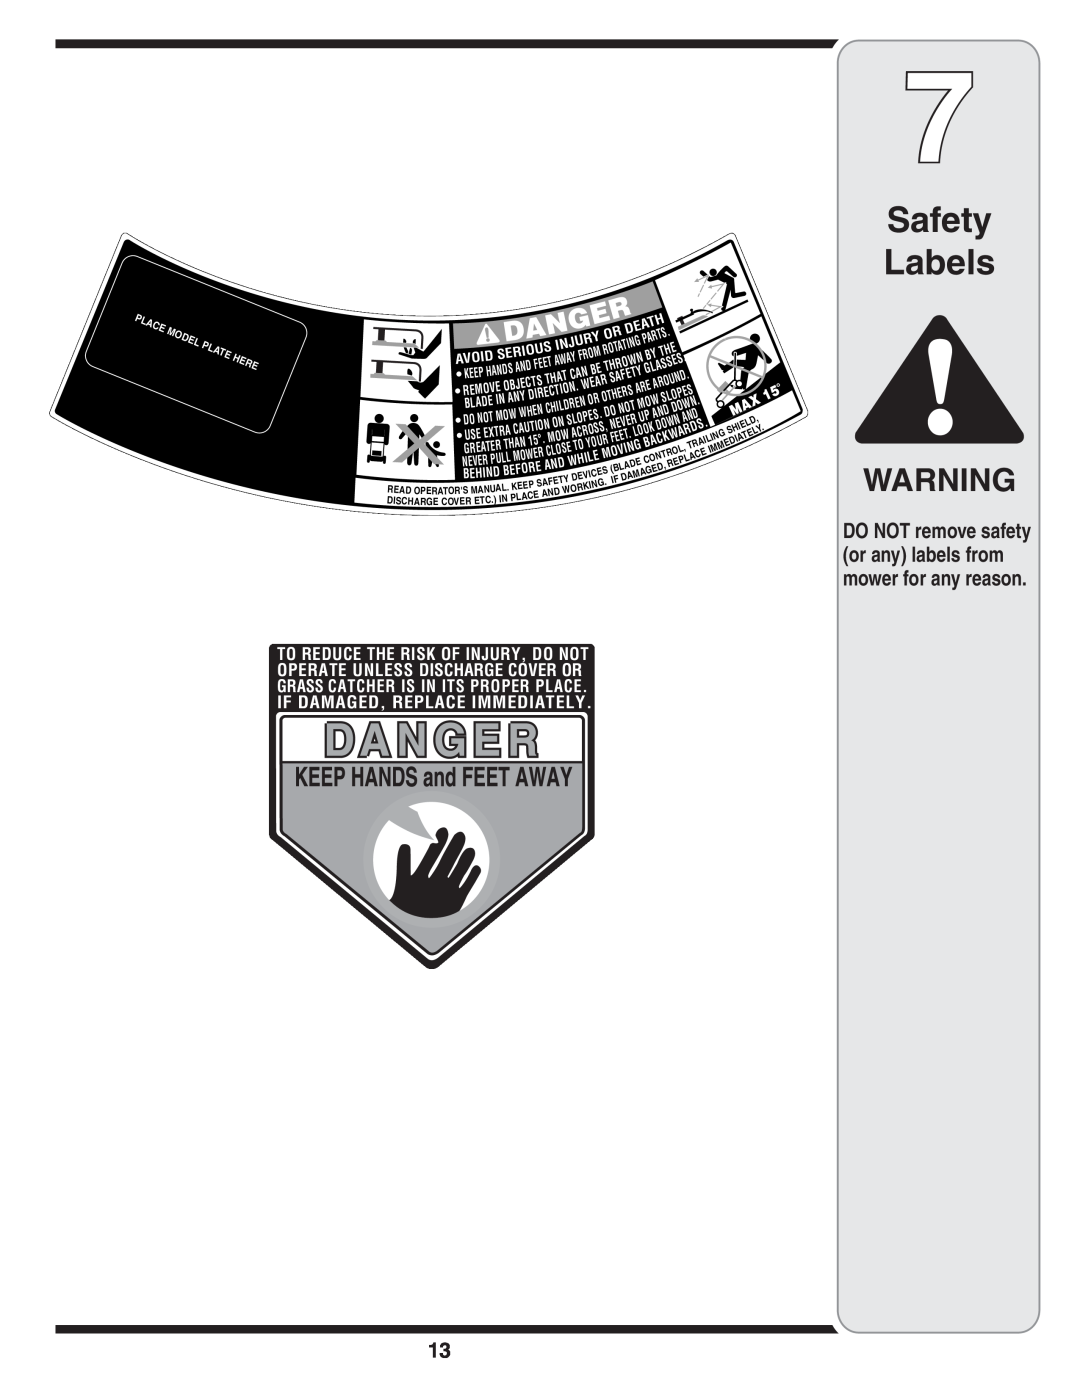 Tecumseh 105 warranty Safety Labels, DO NOT remove safety or any labels from mower for any reason 